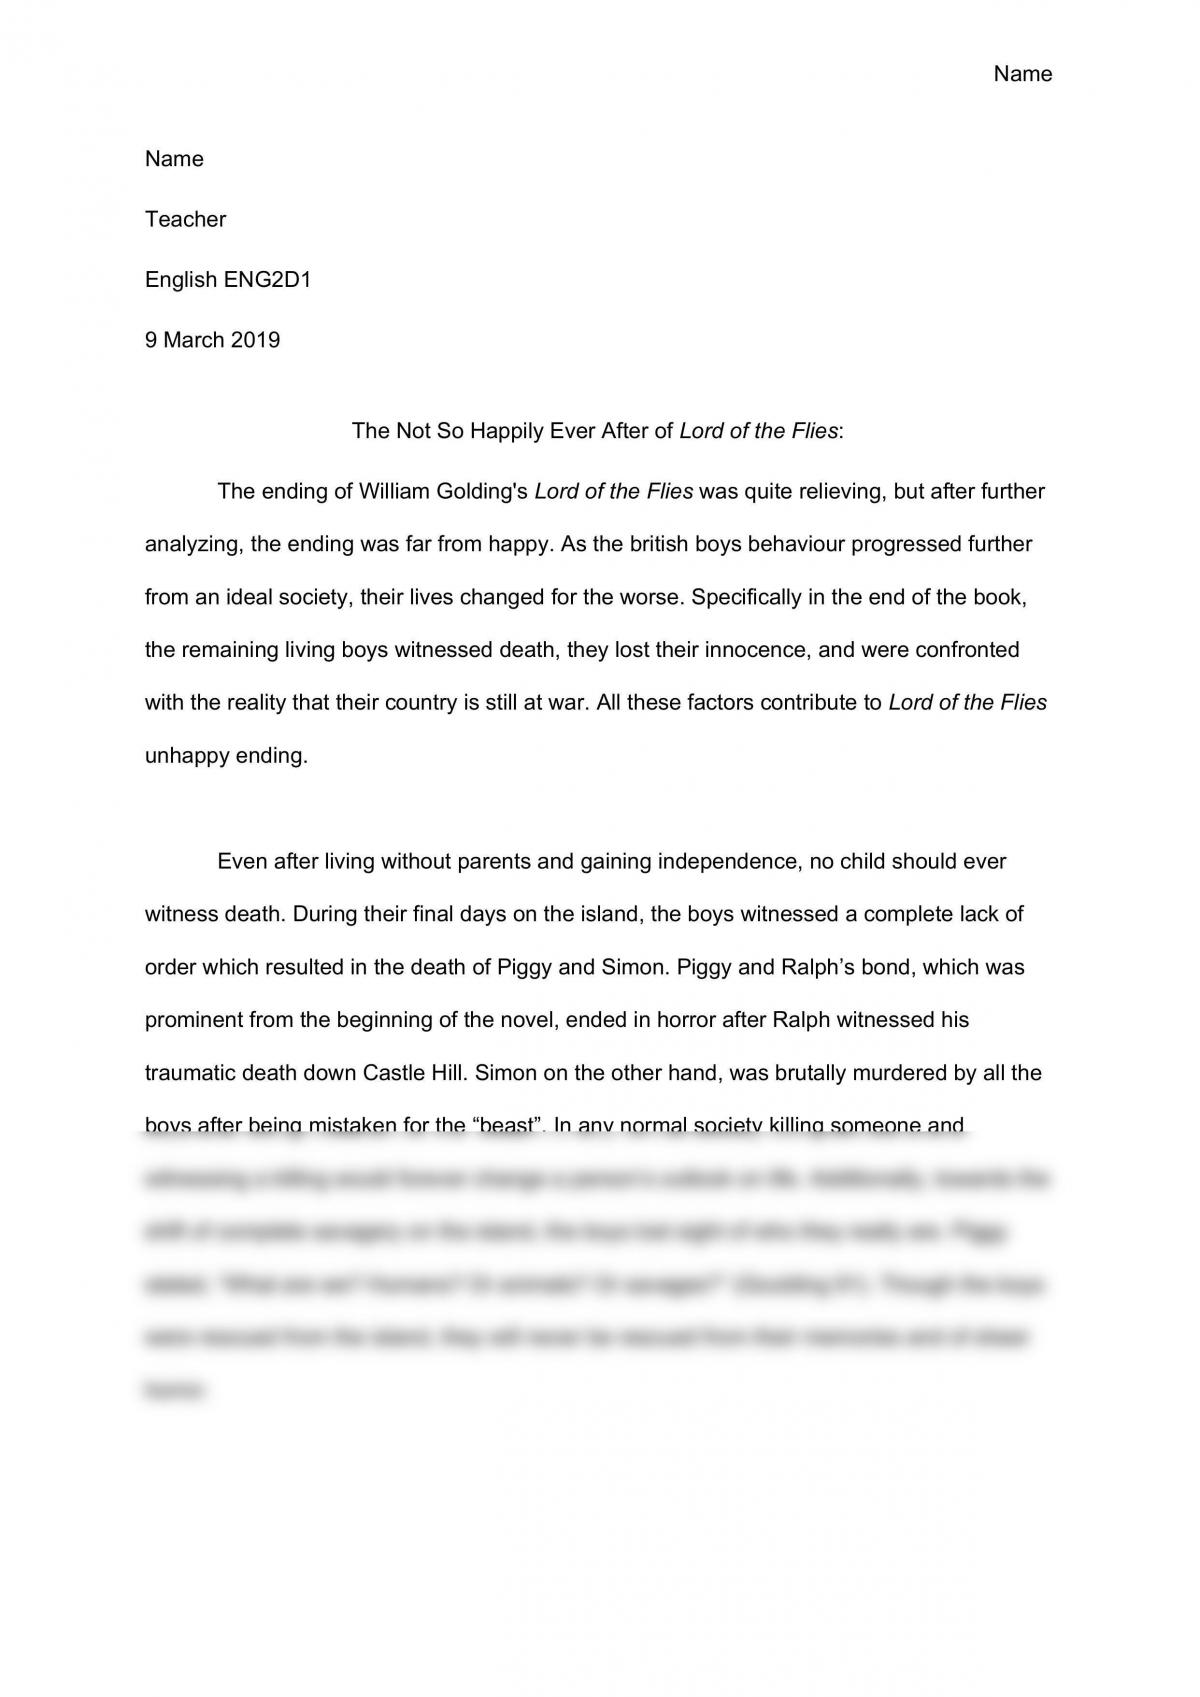 lord of the flies characterization essay